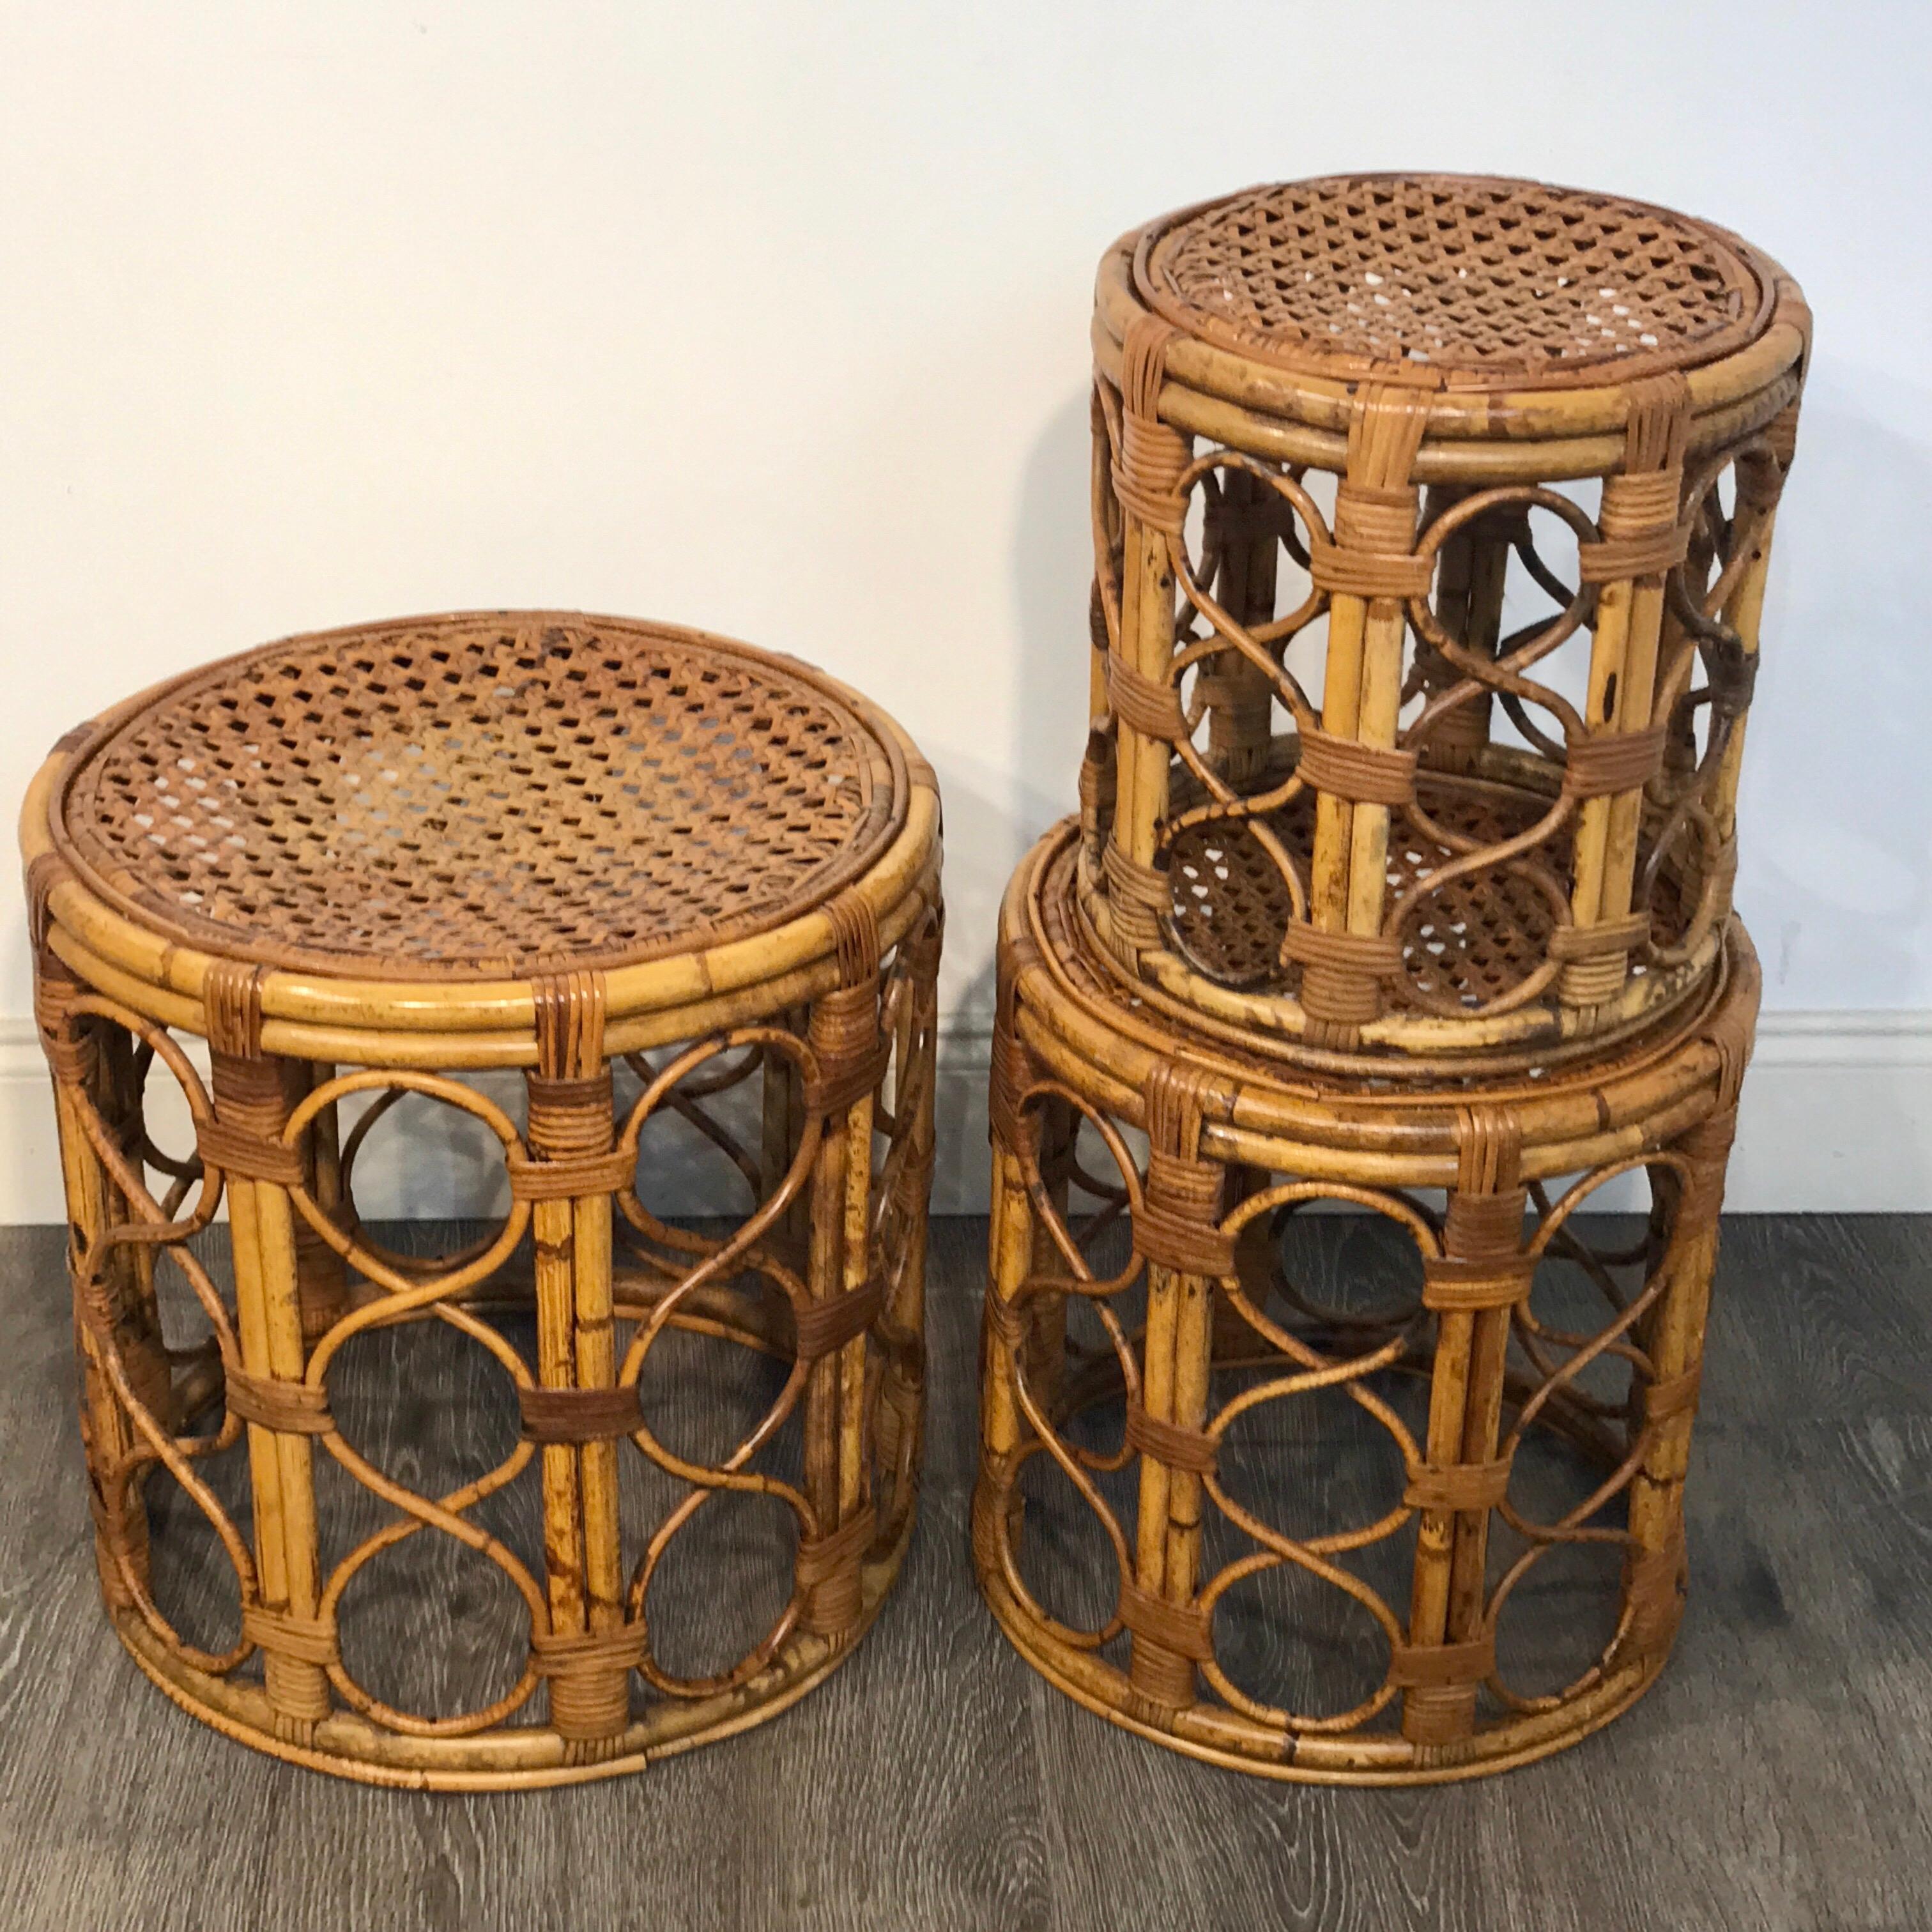 Set of three Graduating/ Nesting bamboo, rattan and reed nesting side tables, each one woven with interlocking circles and a caned top.
Measure: 13